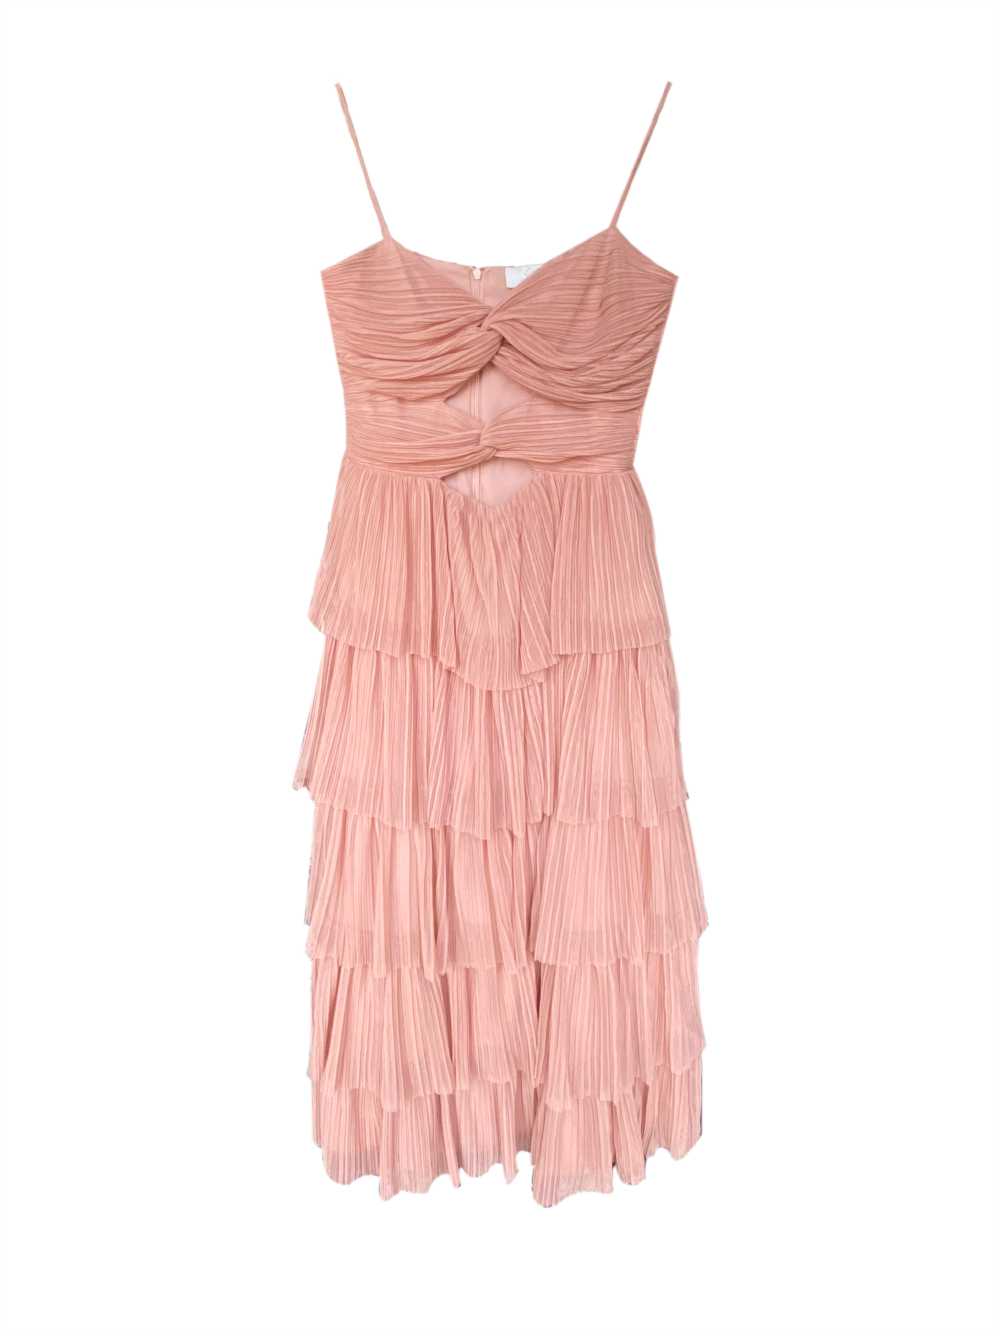 KOCCA long nude strappy ruffle occassion dress A-line S